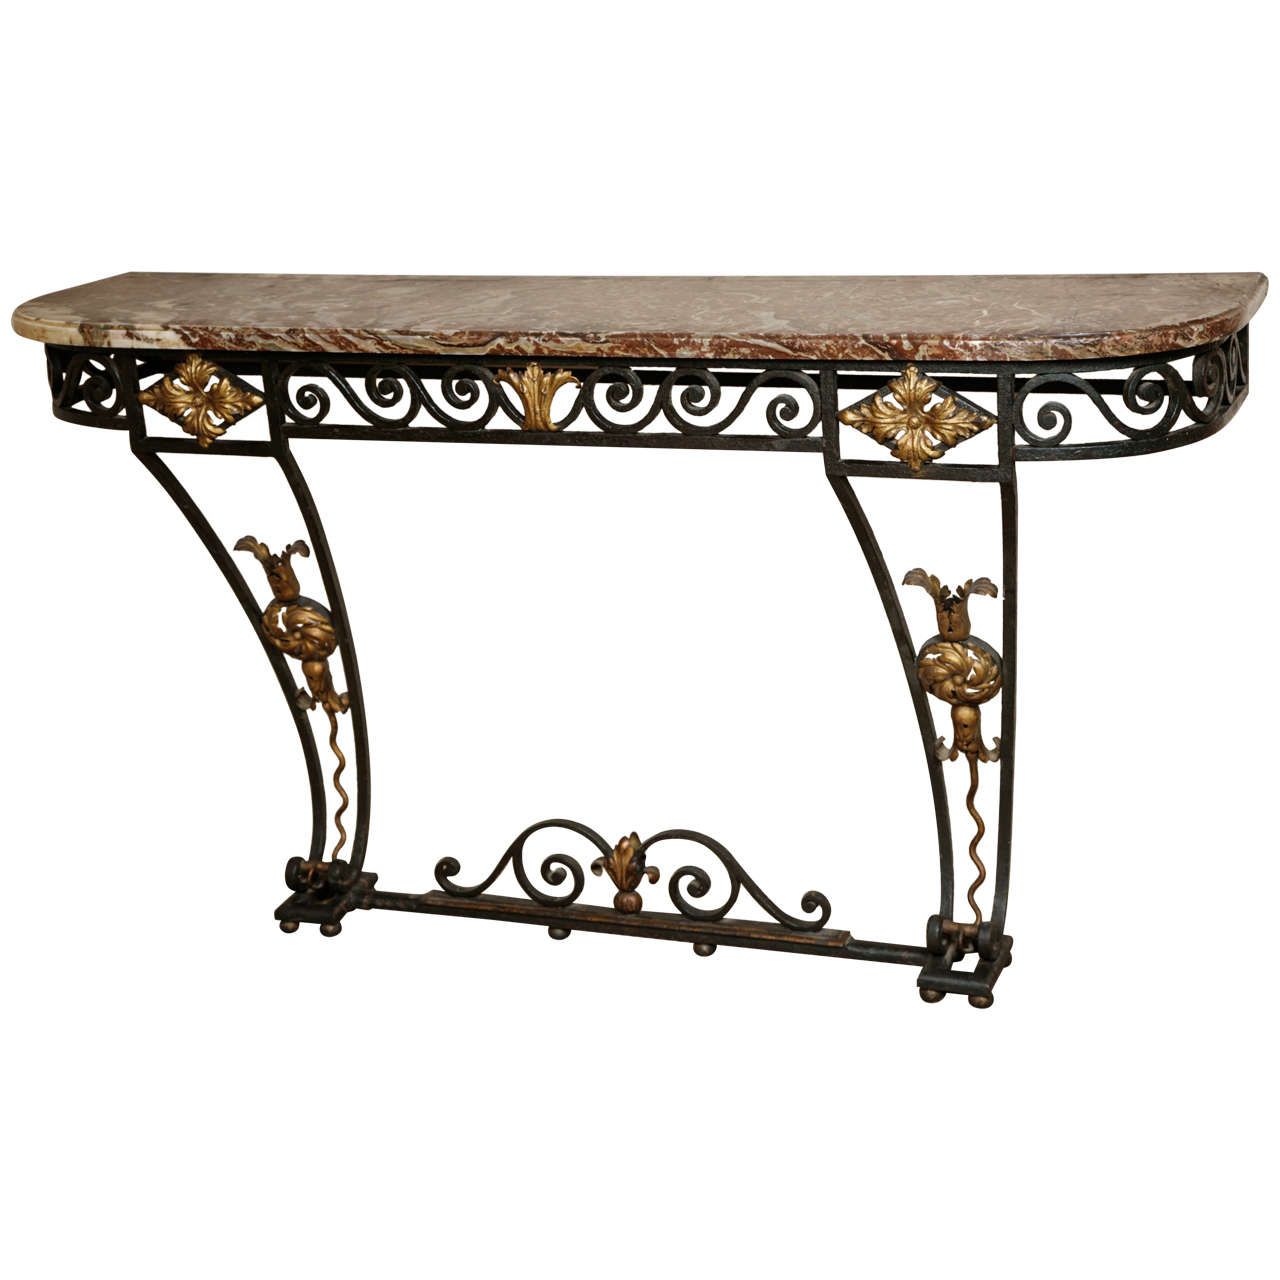 A Cast Iron Console Table Circa 1850 At 1stdibs Inside Round Iron Console Tables (View 4 of 20)